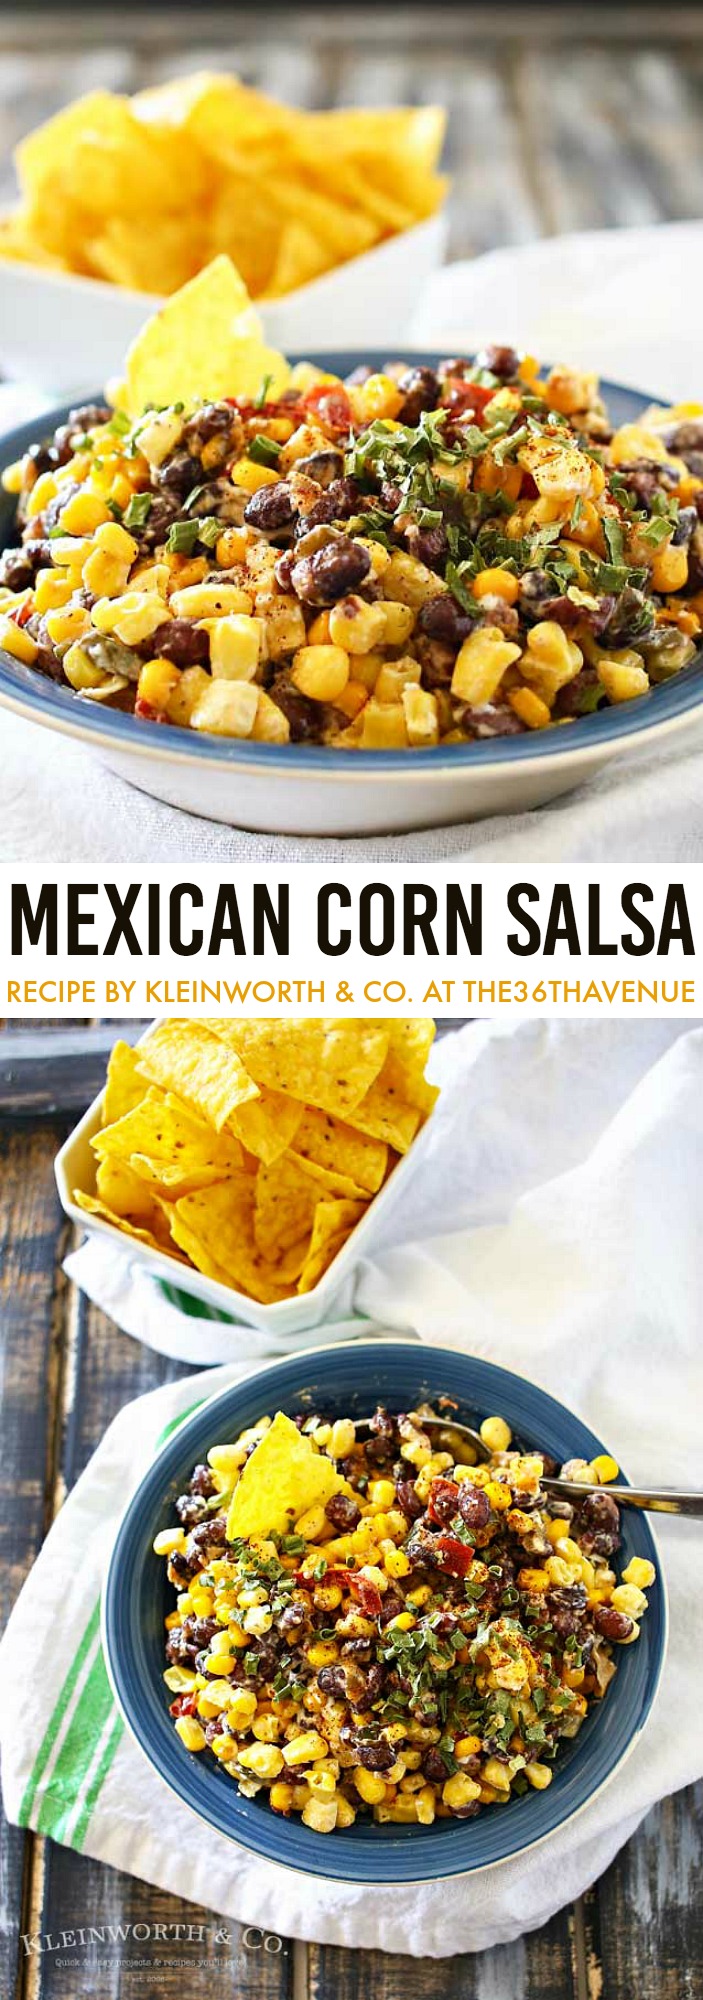 Mexican Corn Salsa - This salsa is delicious. What's not to like, corn, black beans, peppers, onions & chilies all seasoned with chili powder, cumin & a zingy lime crema. 